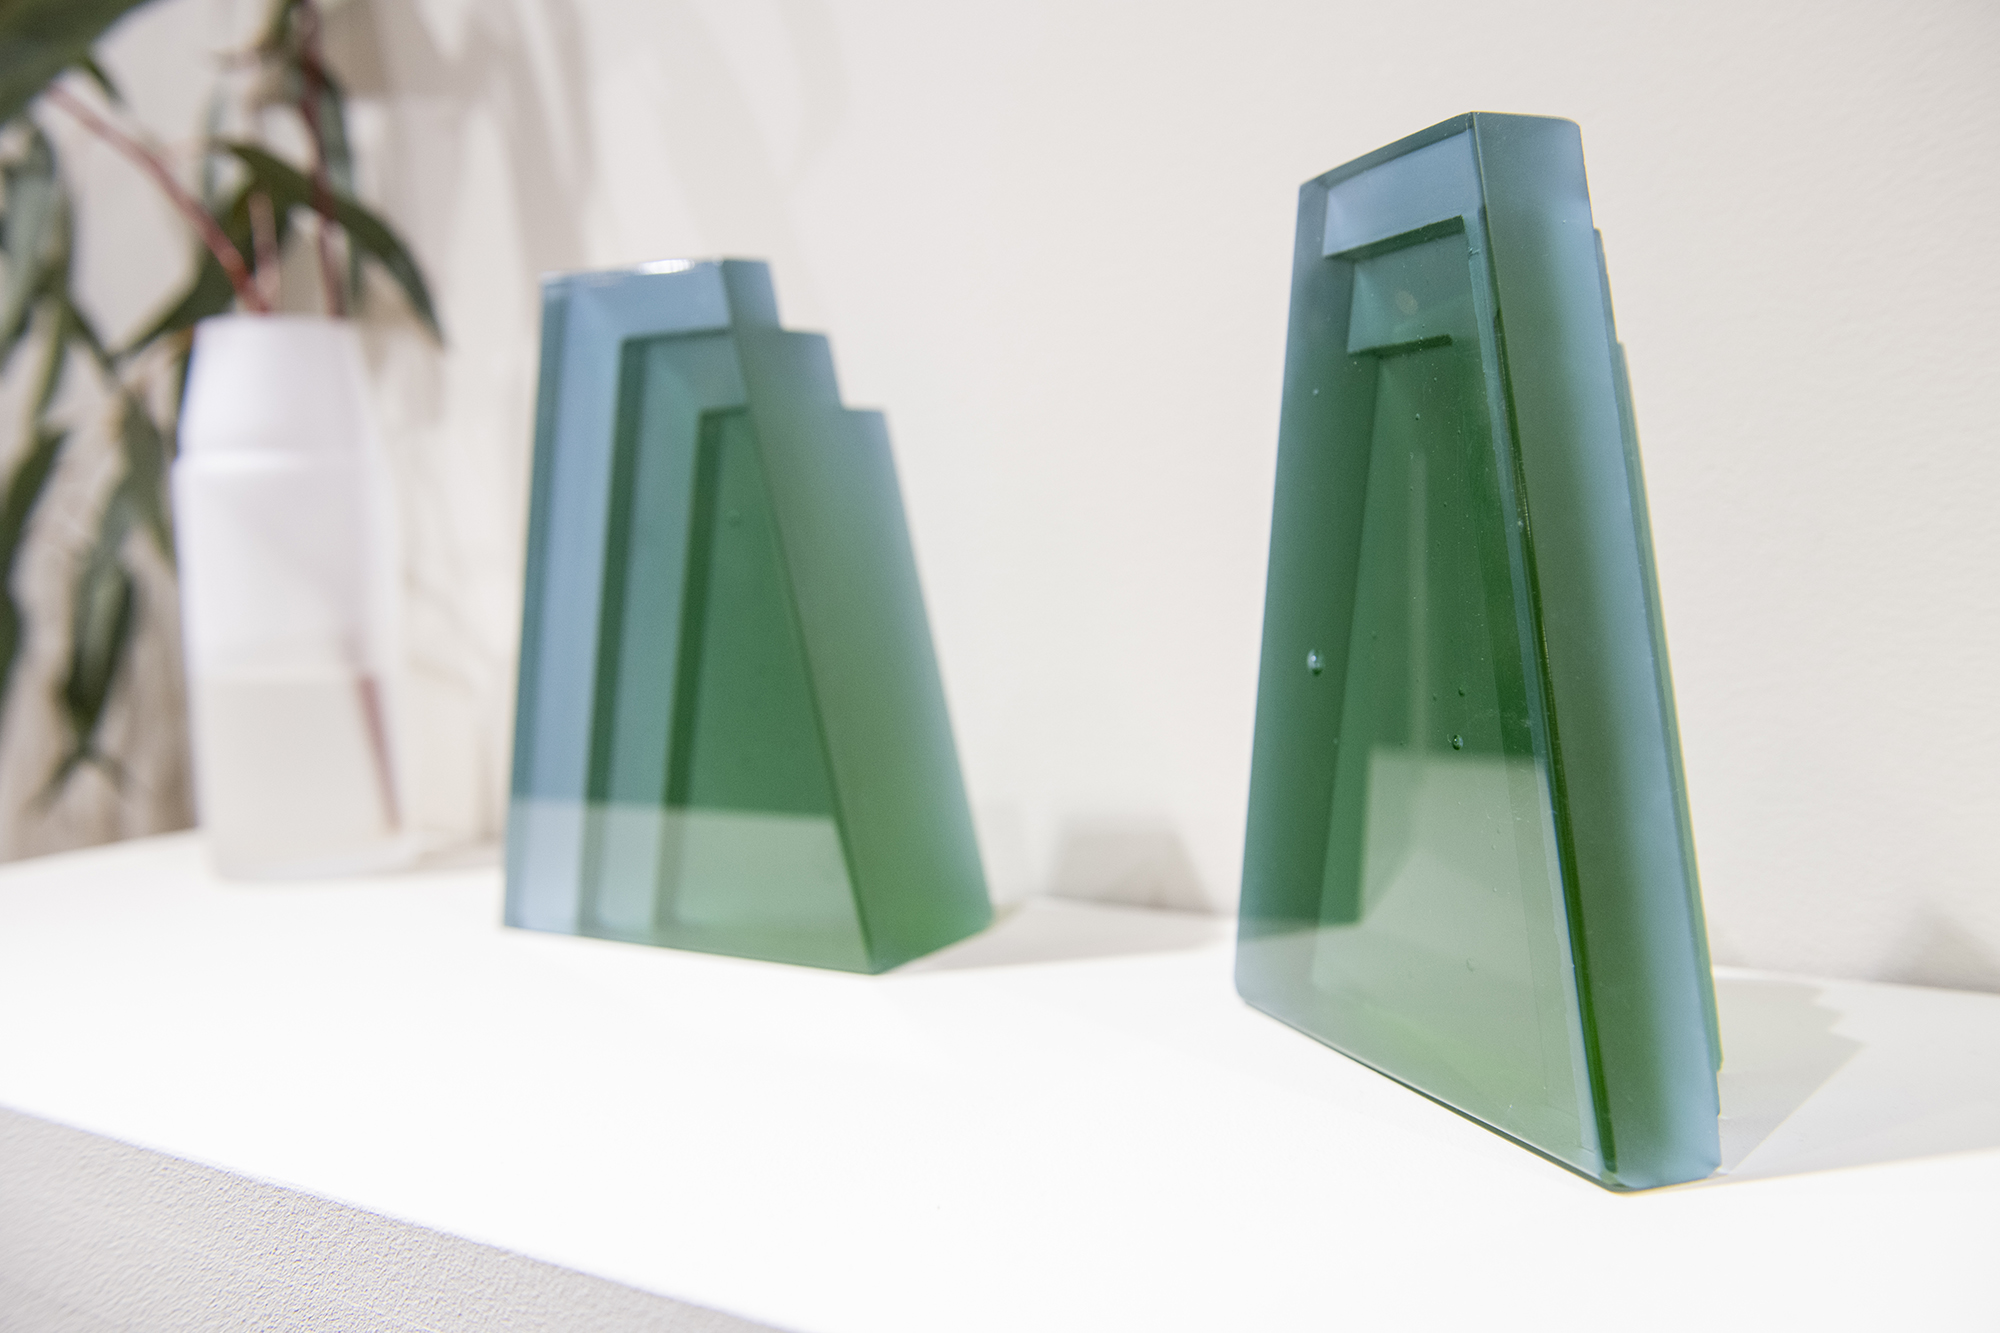 A pair of green, cast glass bookends.